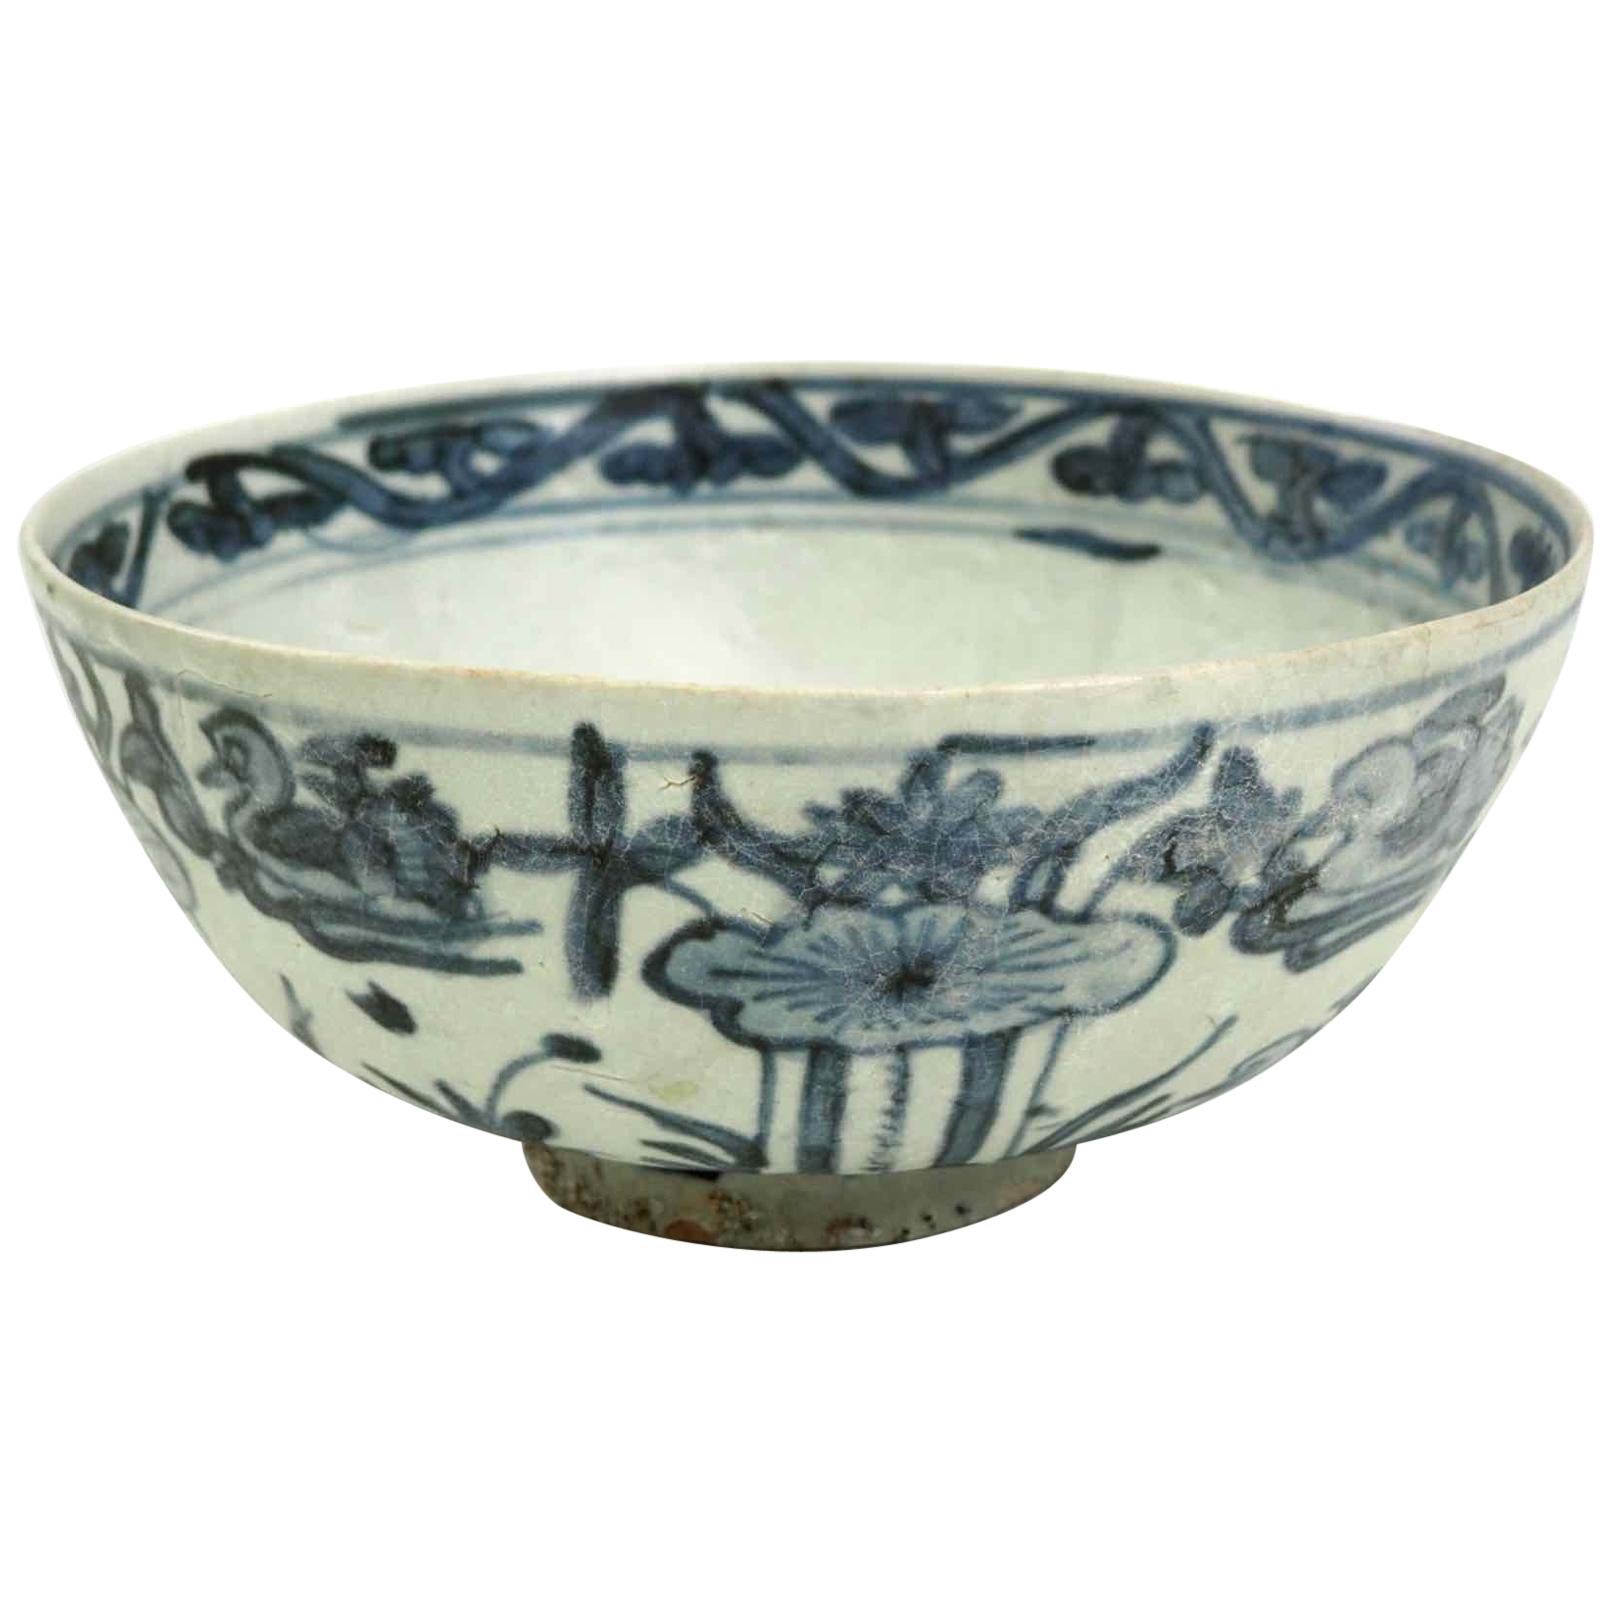 Chinese Porcelain, Shipwreck Founding, 17th Century